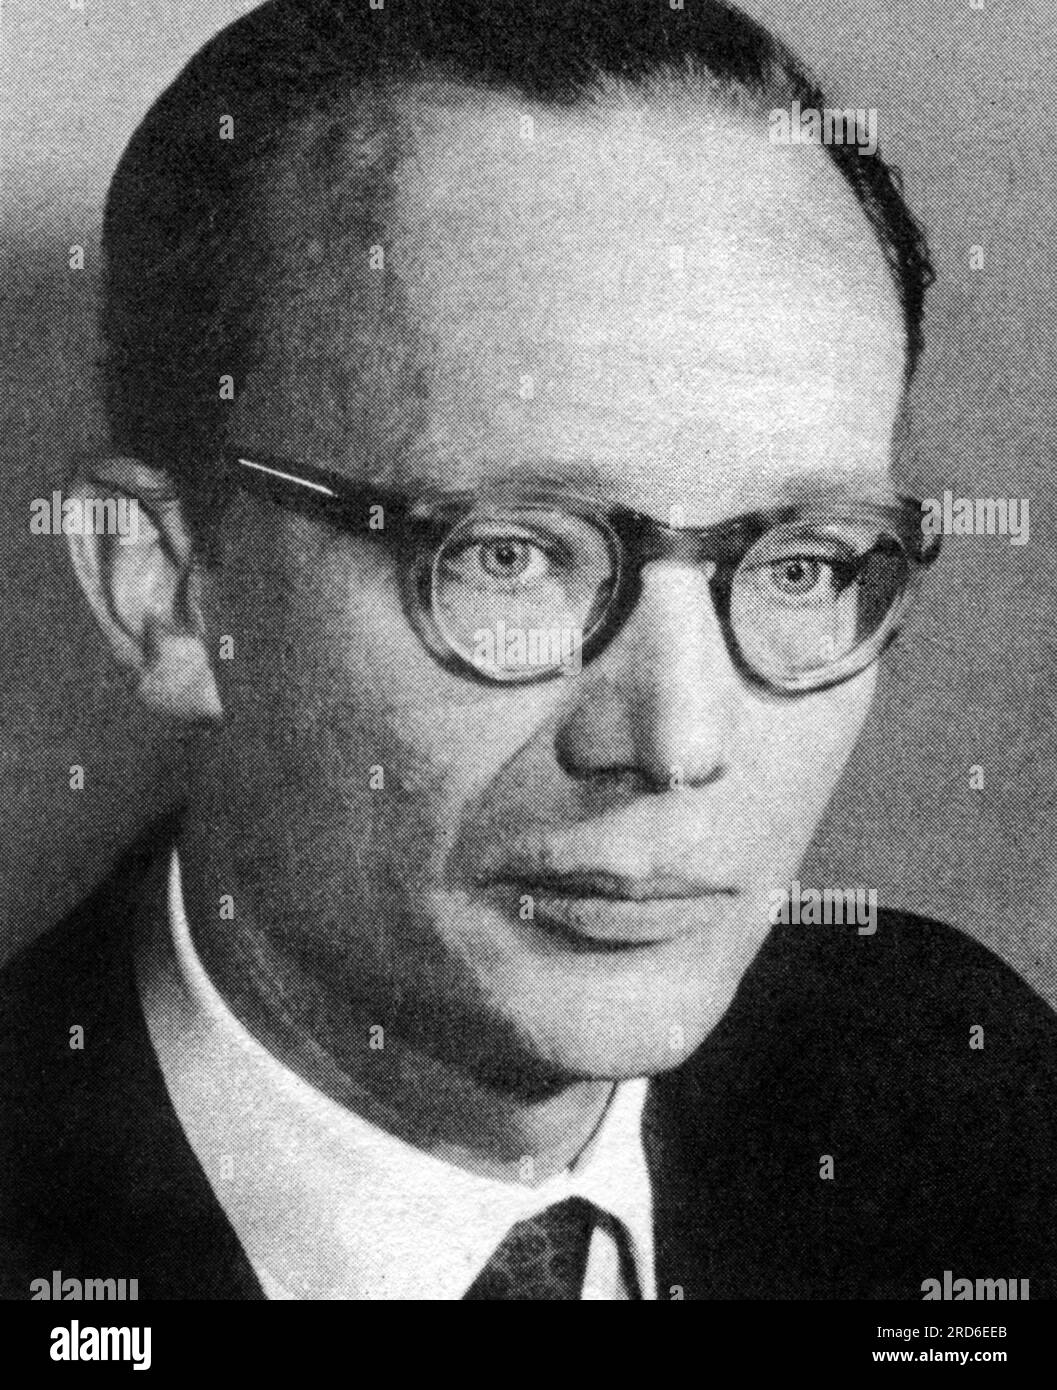 Wolff, Dieter, * 2.7.1920, German journalist, 1963, ADDITIONAL-RIGHTS-CLEARANCE-INFO-NOT-AVAILABLE Stock Photo